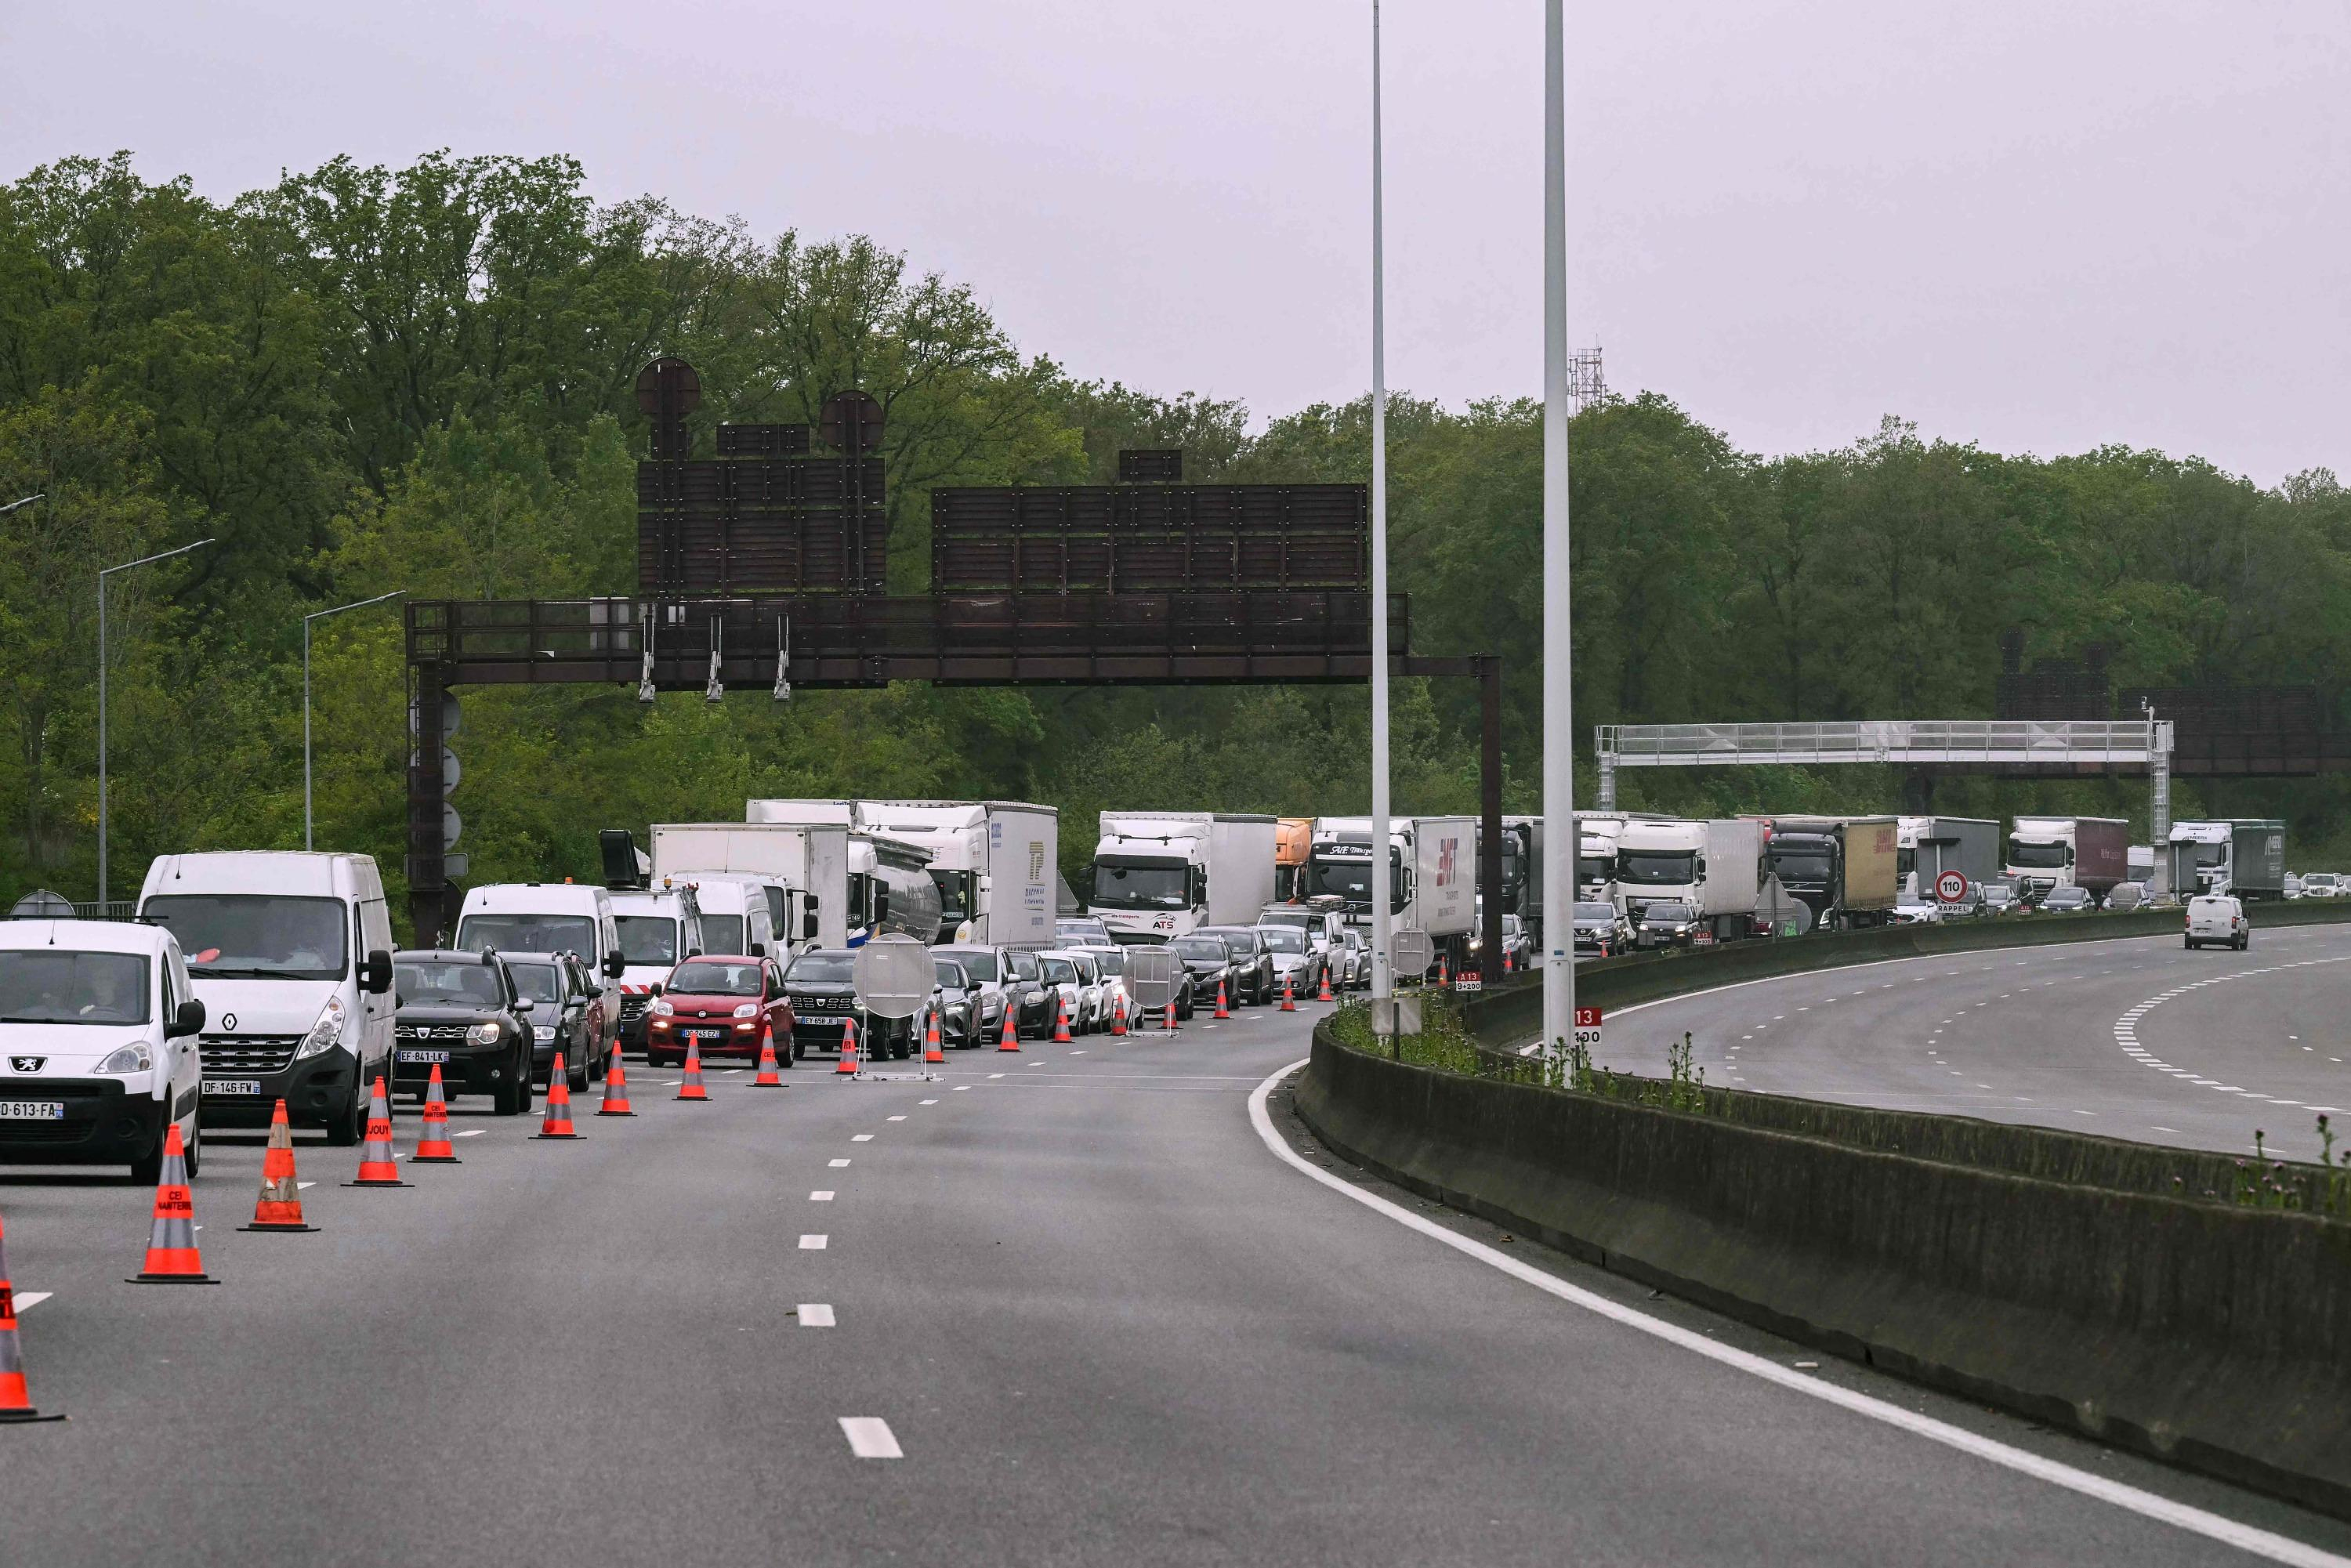 Closure of the A13: would it really be possible to make the A14 free?